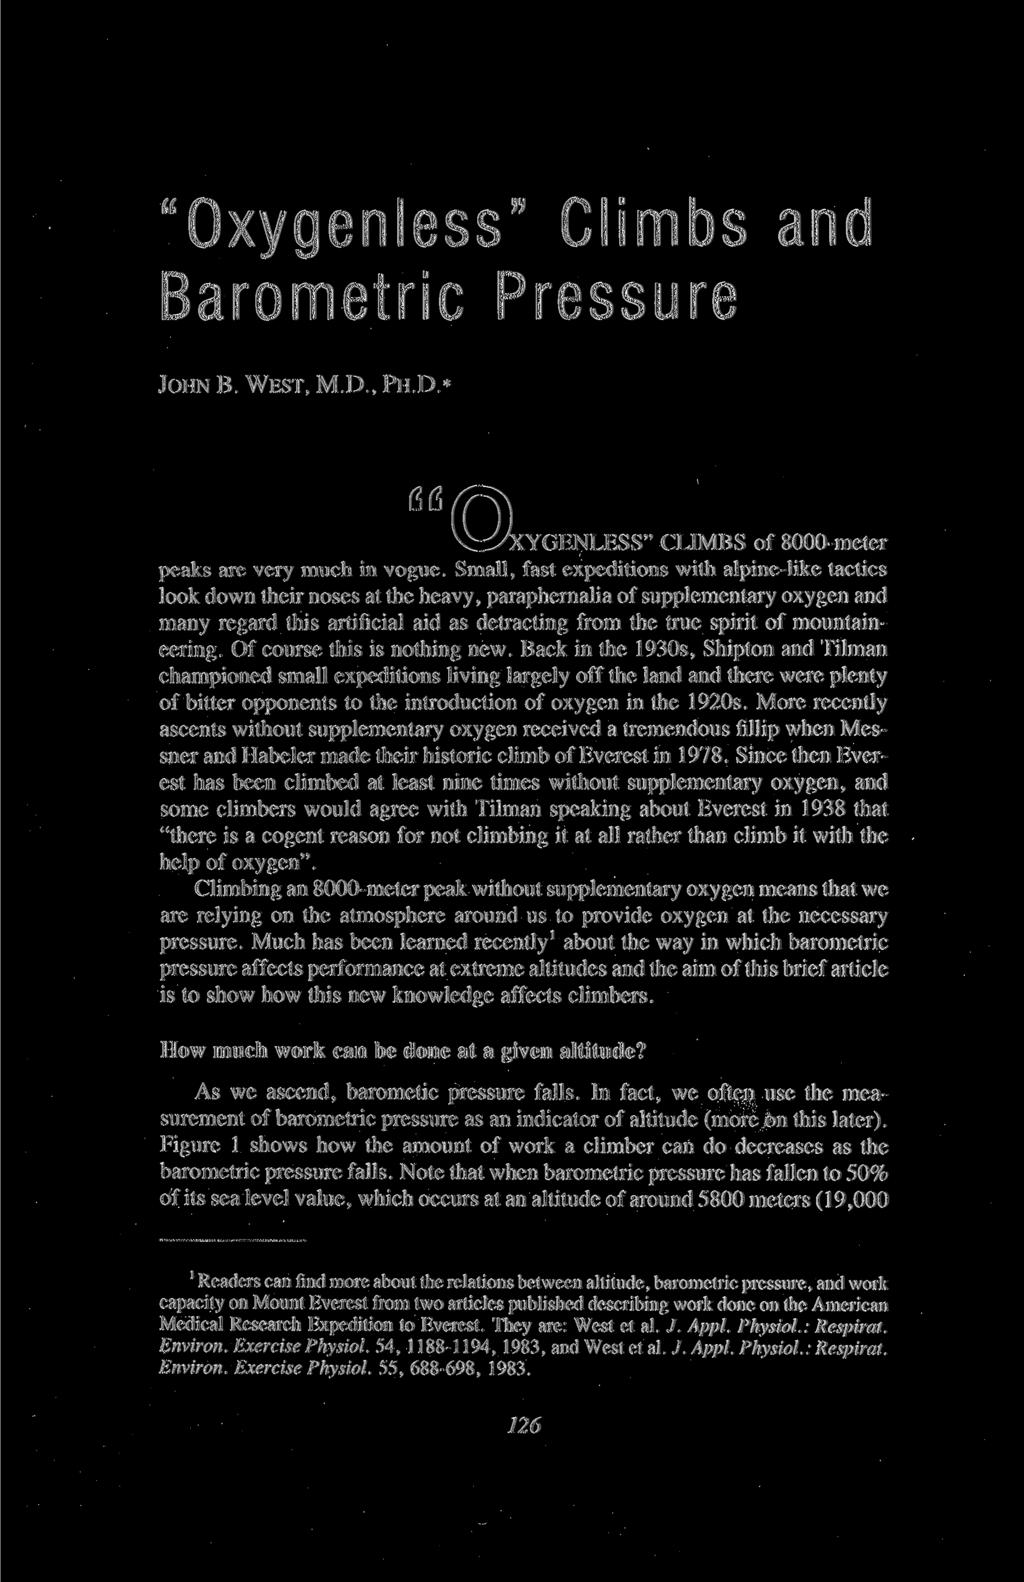 Oxygenless Climbs and Barometric Pressure John B. W e s t, M.D., P h.d.* O XYGENLESS CLIMBS of 8000-meter peaks are very much in vogue.